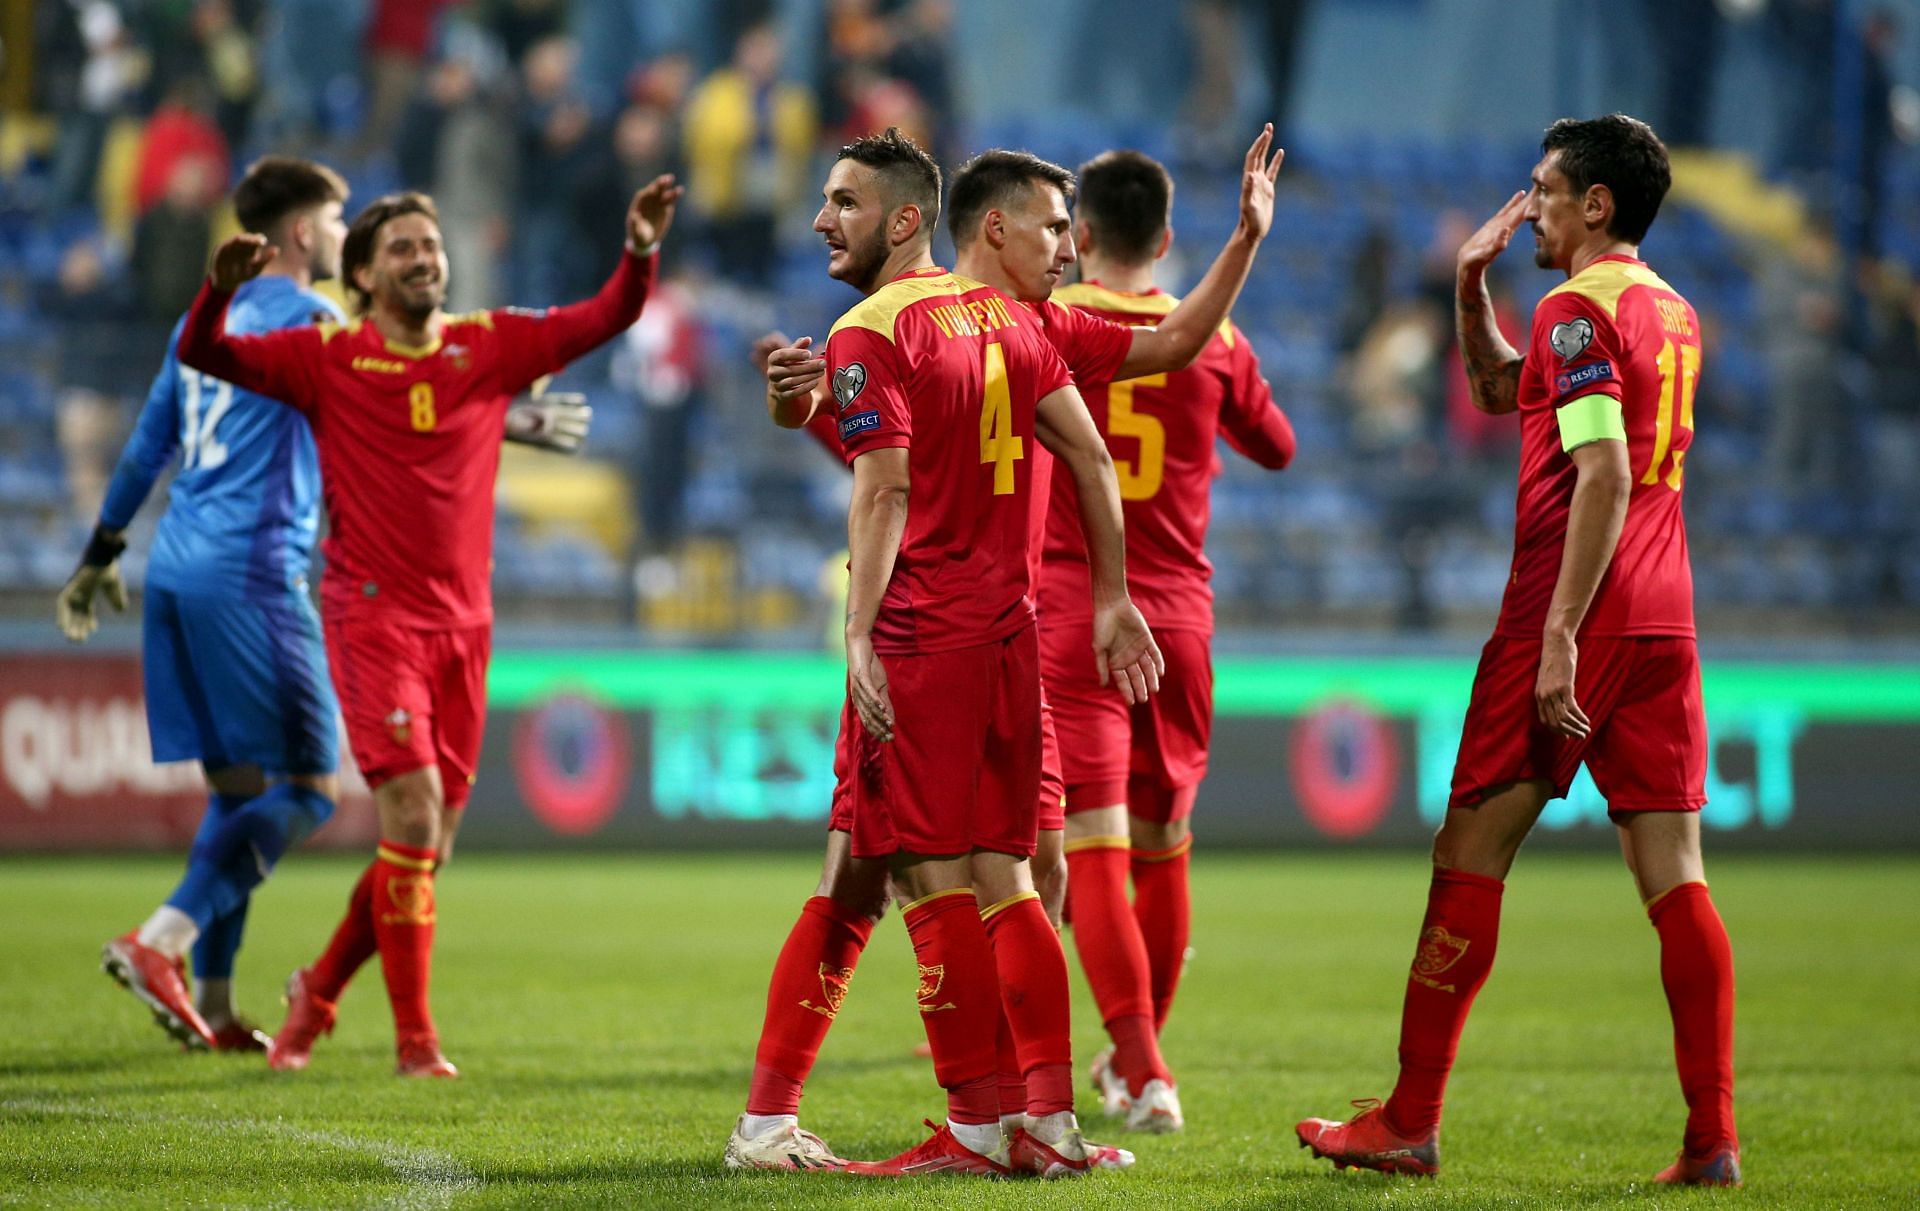 Montenegro and Armenia meet for only the third time in history